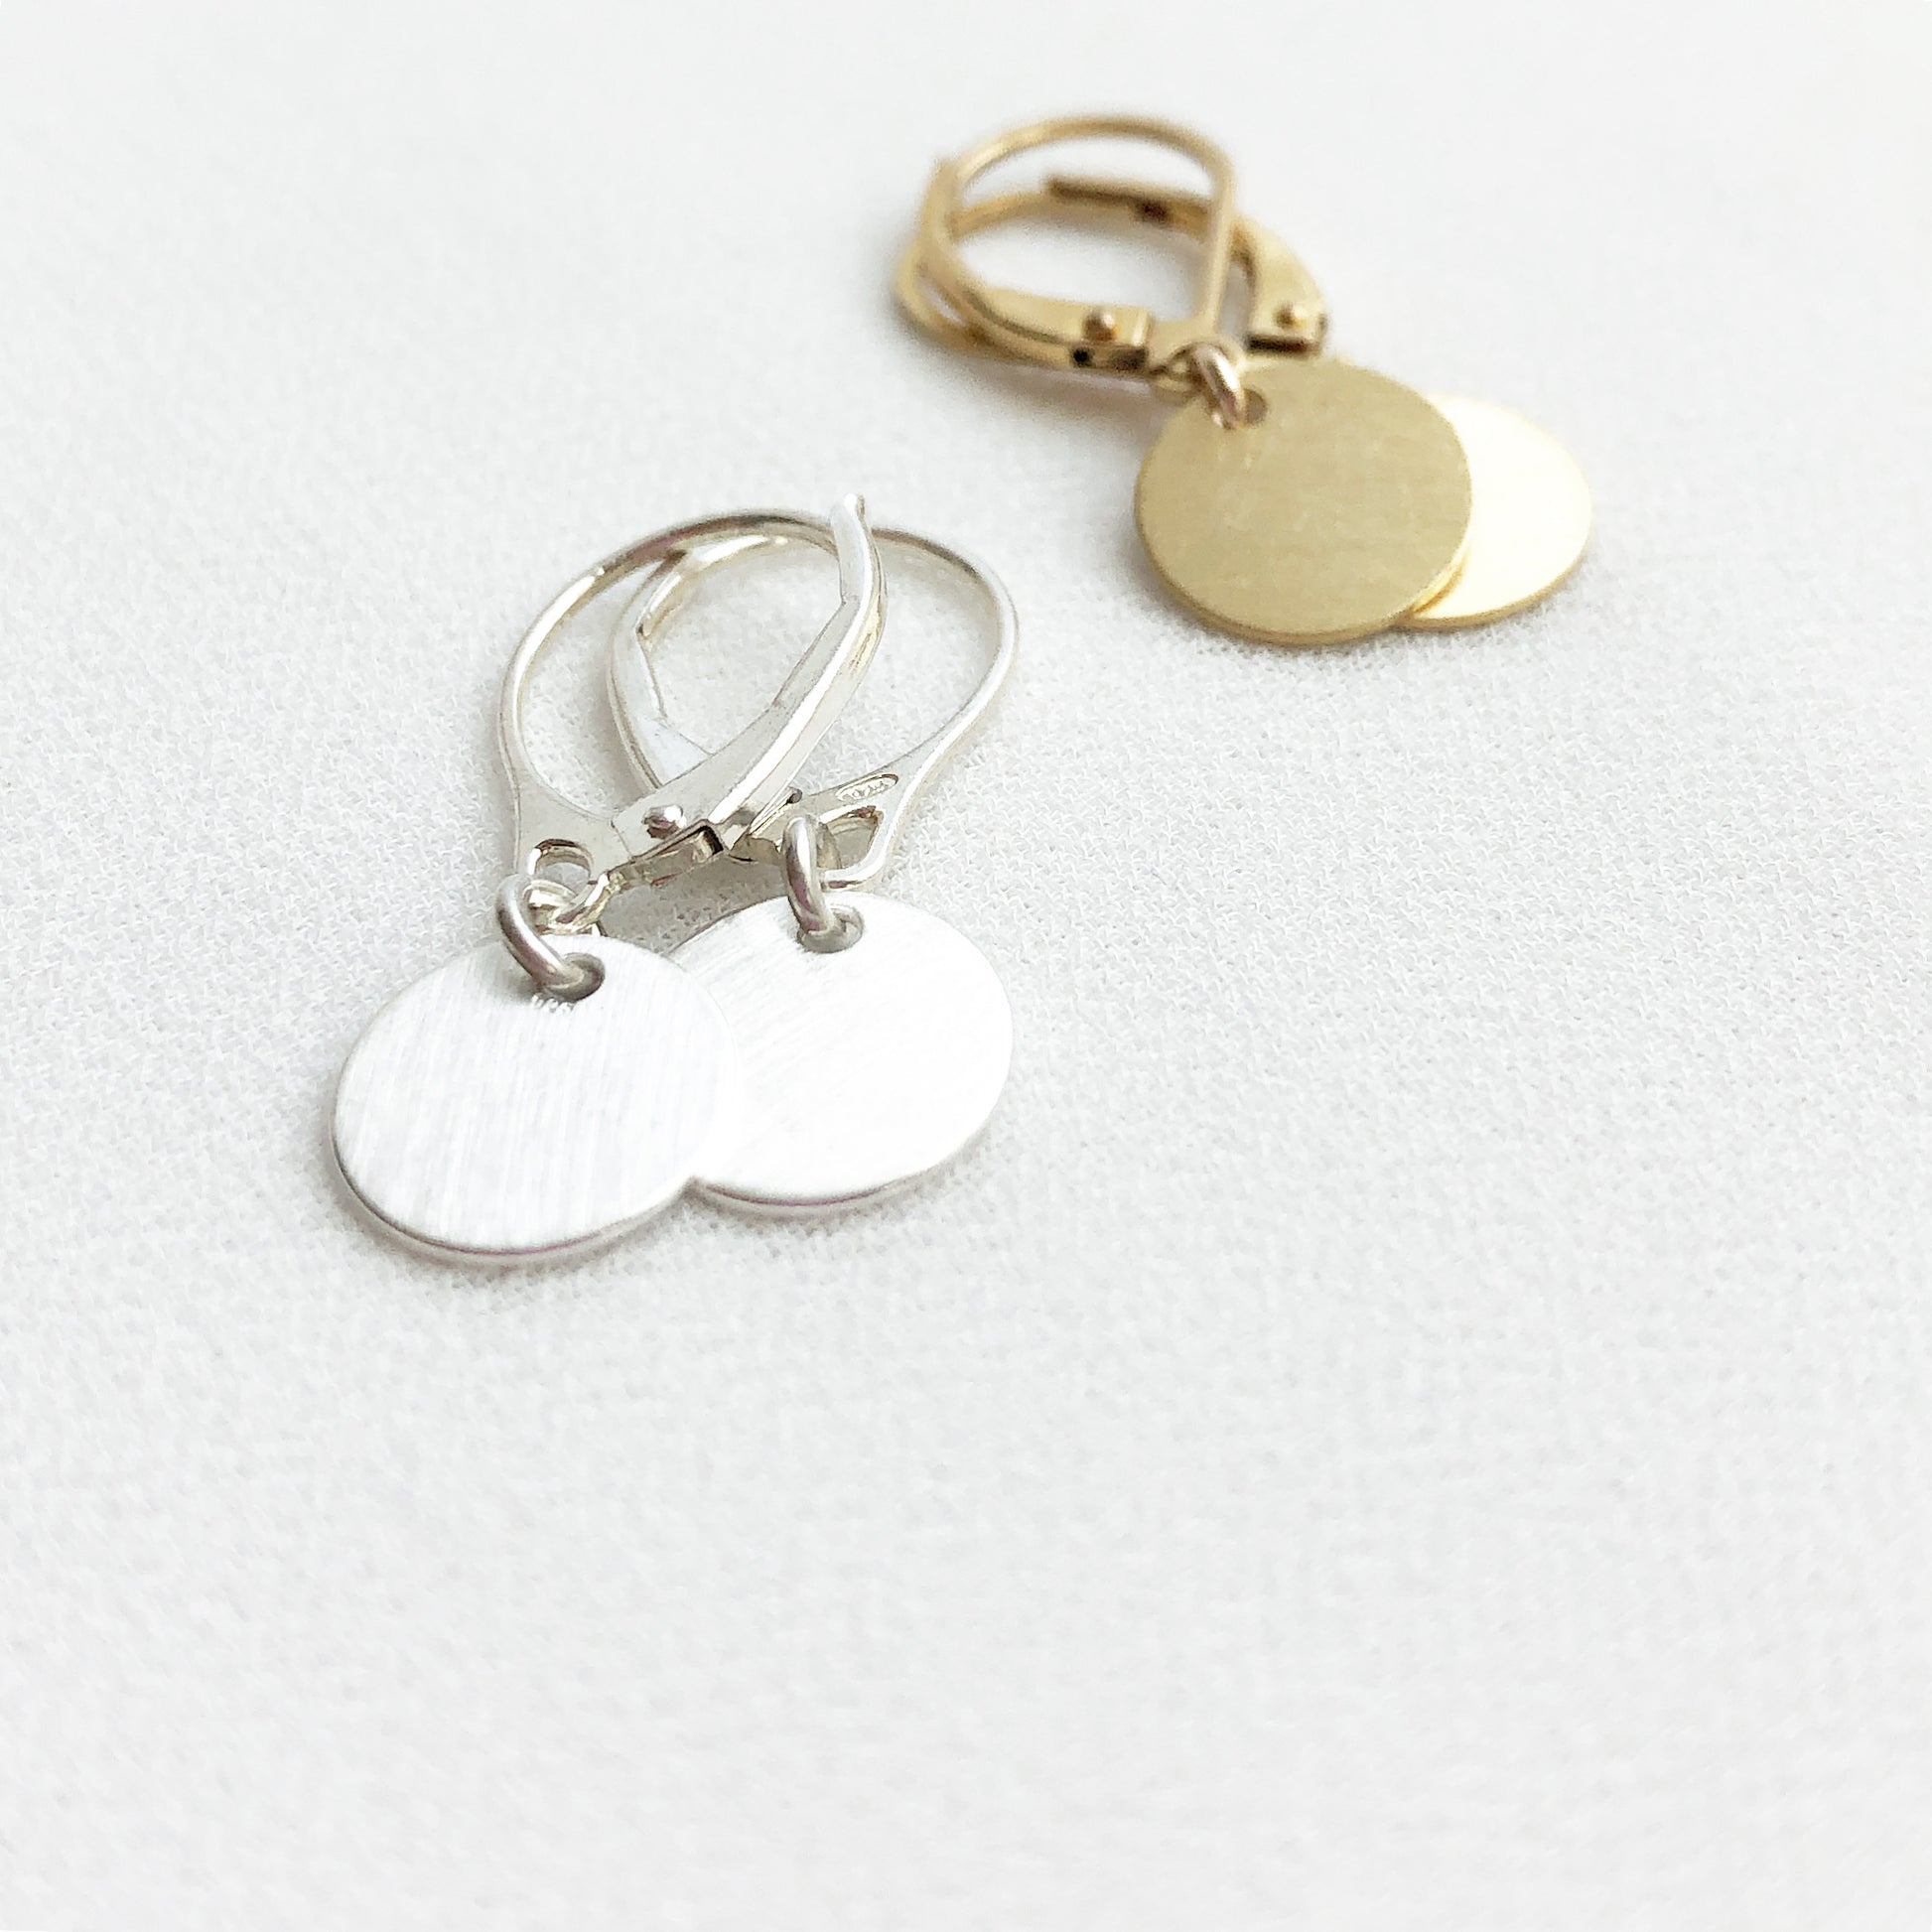 Disc Leverback Earrings, Disc Dangle Earrings, Coin Earrings, Drop Earrings, Lever Back Earrings, Circle Drop Earrings, Mother’s Gifts, Office Outfit, Delicate Jewelry, Mothers Gift, Coco Wagner Jewelry, Gift For Her, Gift Ideas,  Birthday Gift, Anniversary Gift, Layering Jewelry, layering Necklace, Long Necklace Christmas Gift Ideas, Minimalist Jewelry, Everyday Jewelry, 